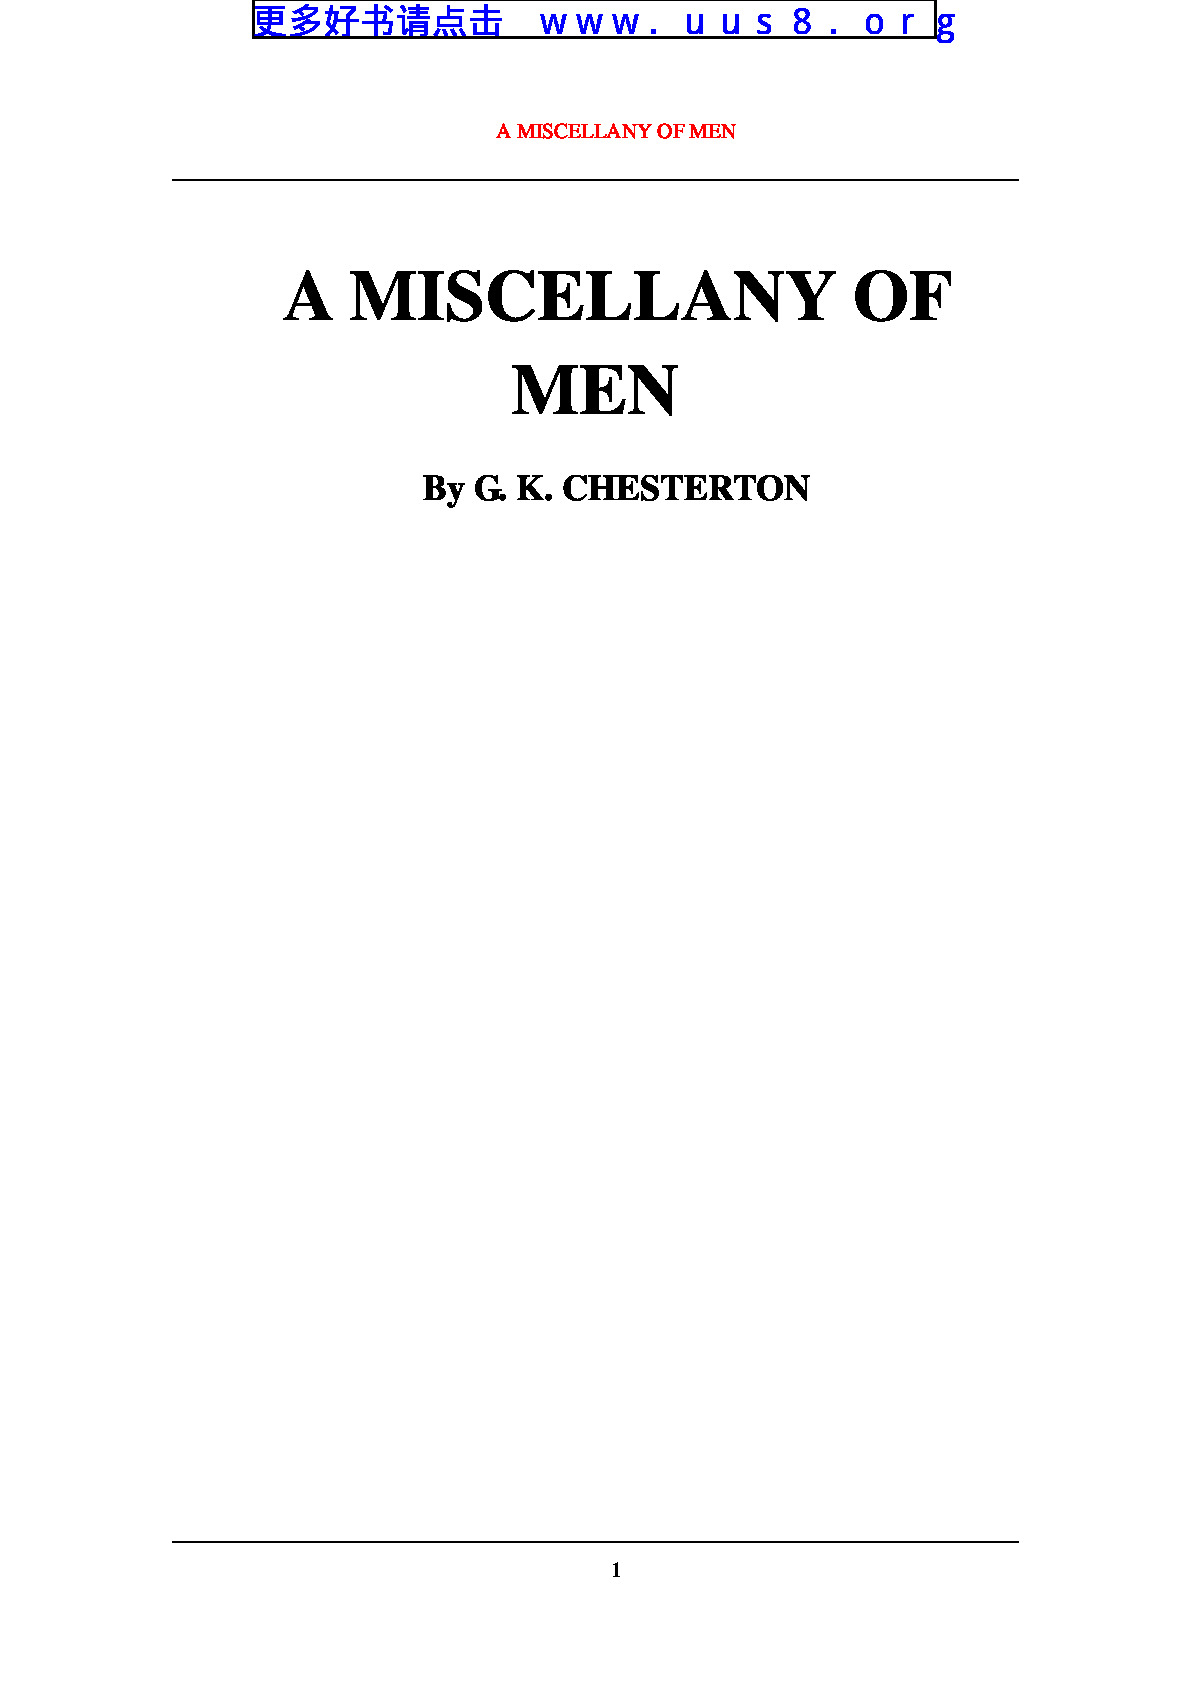 a_miscellany_of_men(杂人)